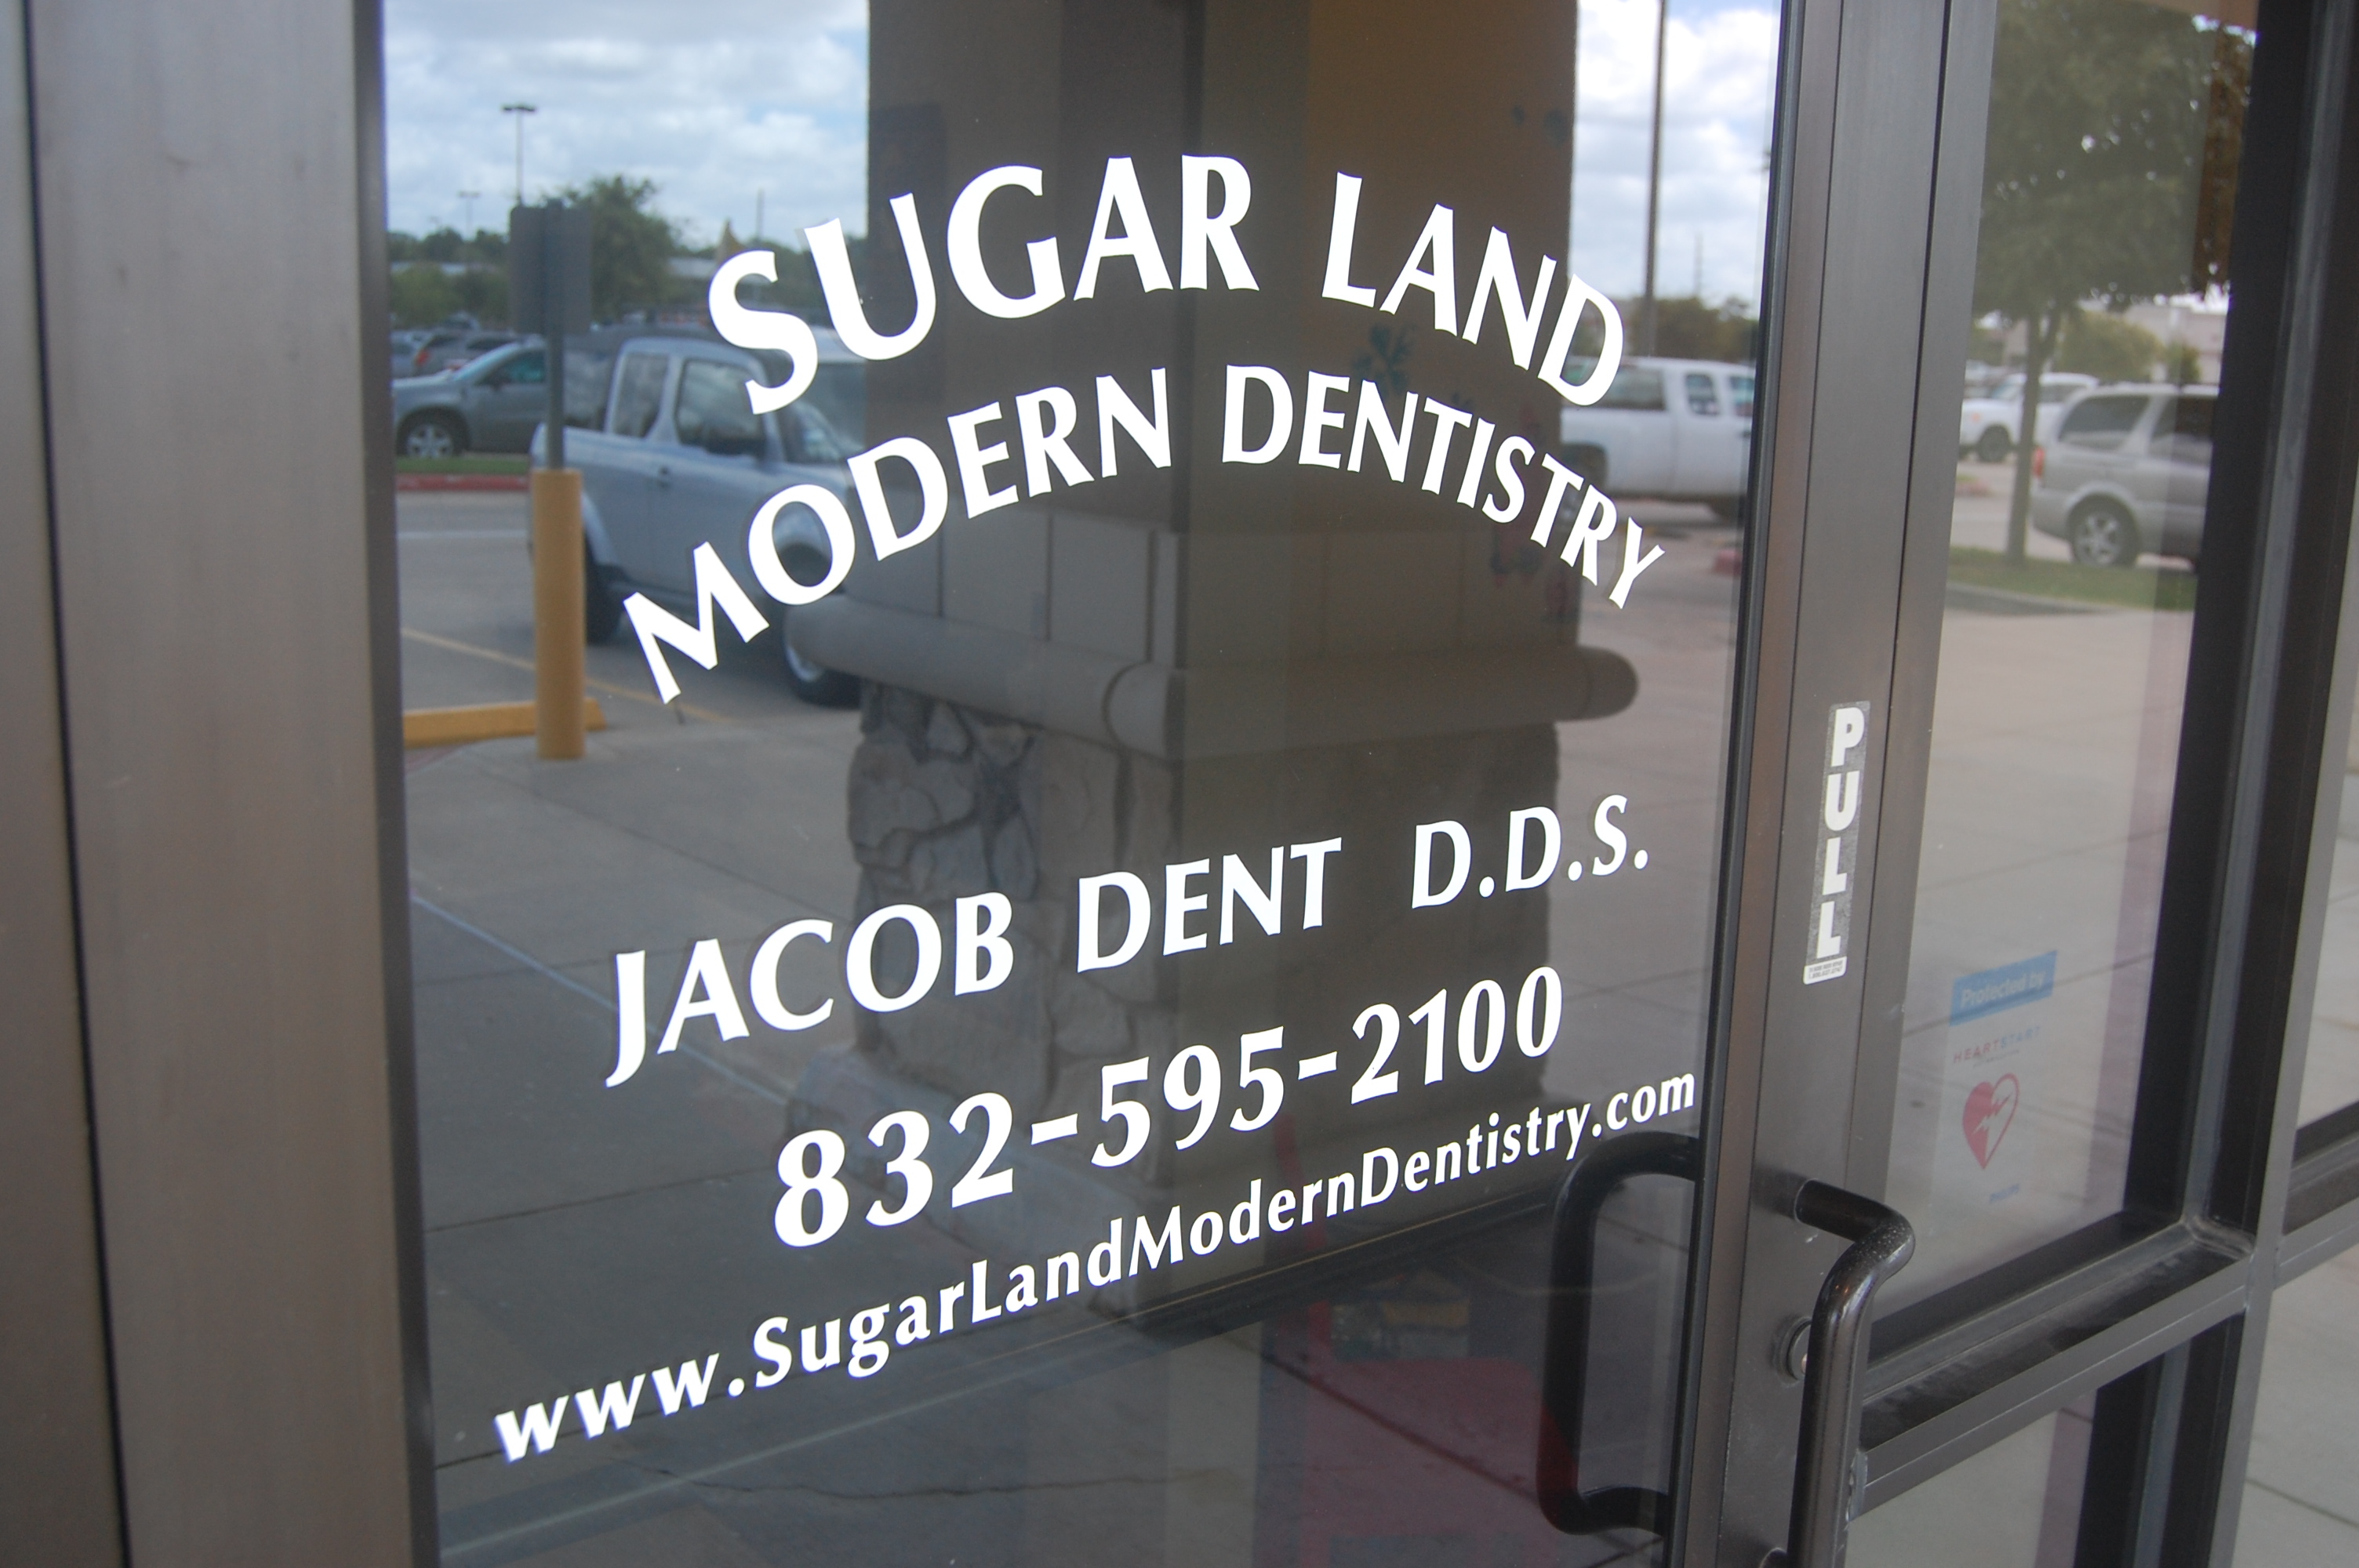 Sugar Land Modern Dentistry and Orthodontics opened its doors to the Sugar Land community in February 2011.